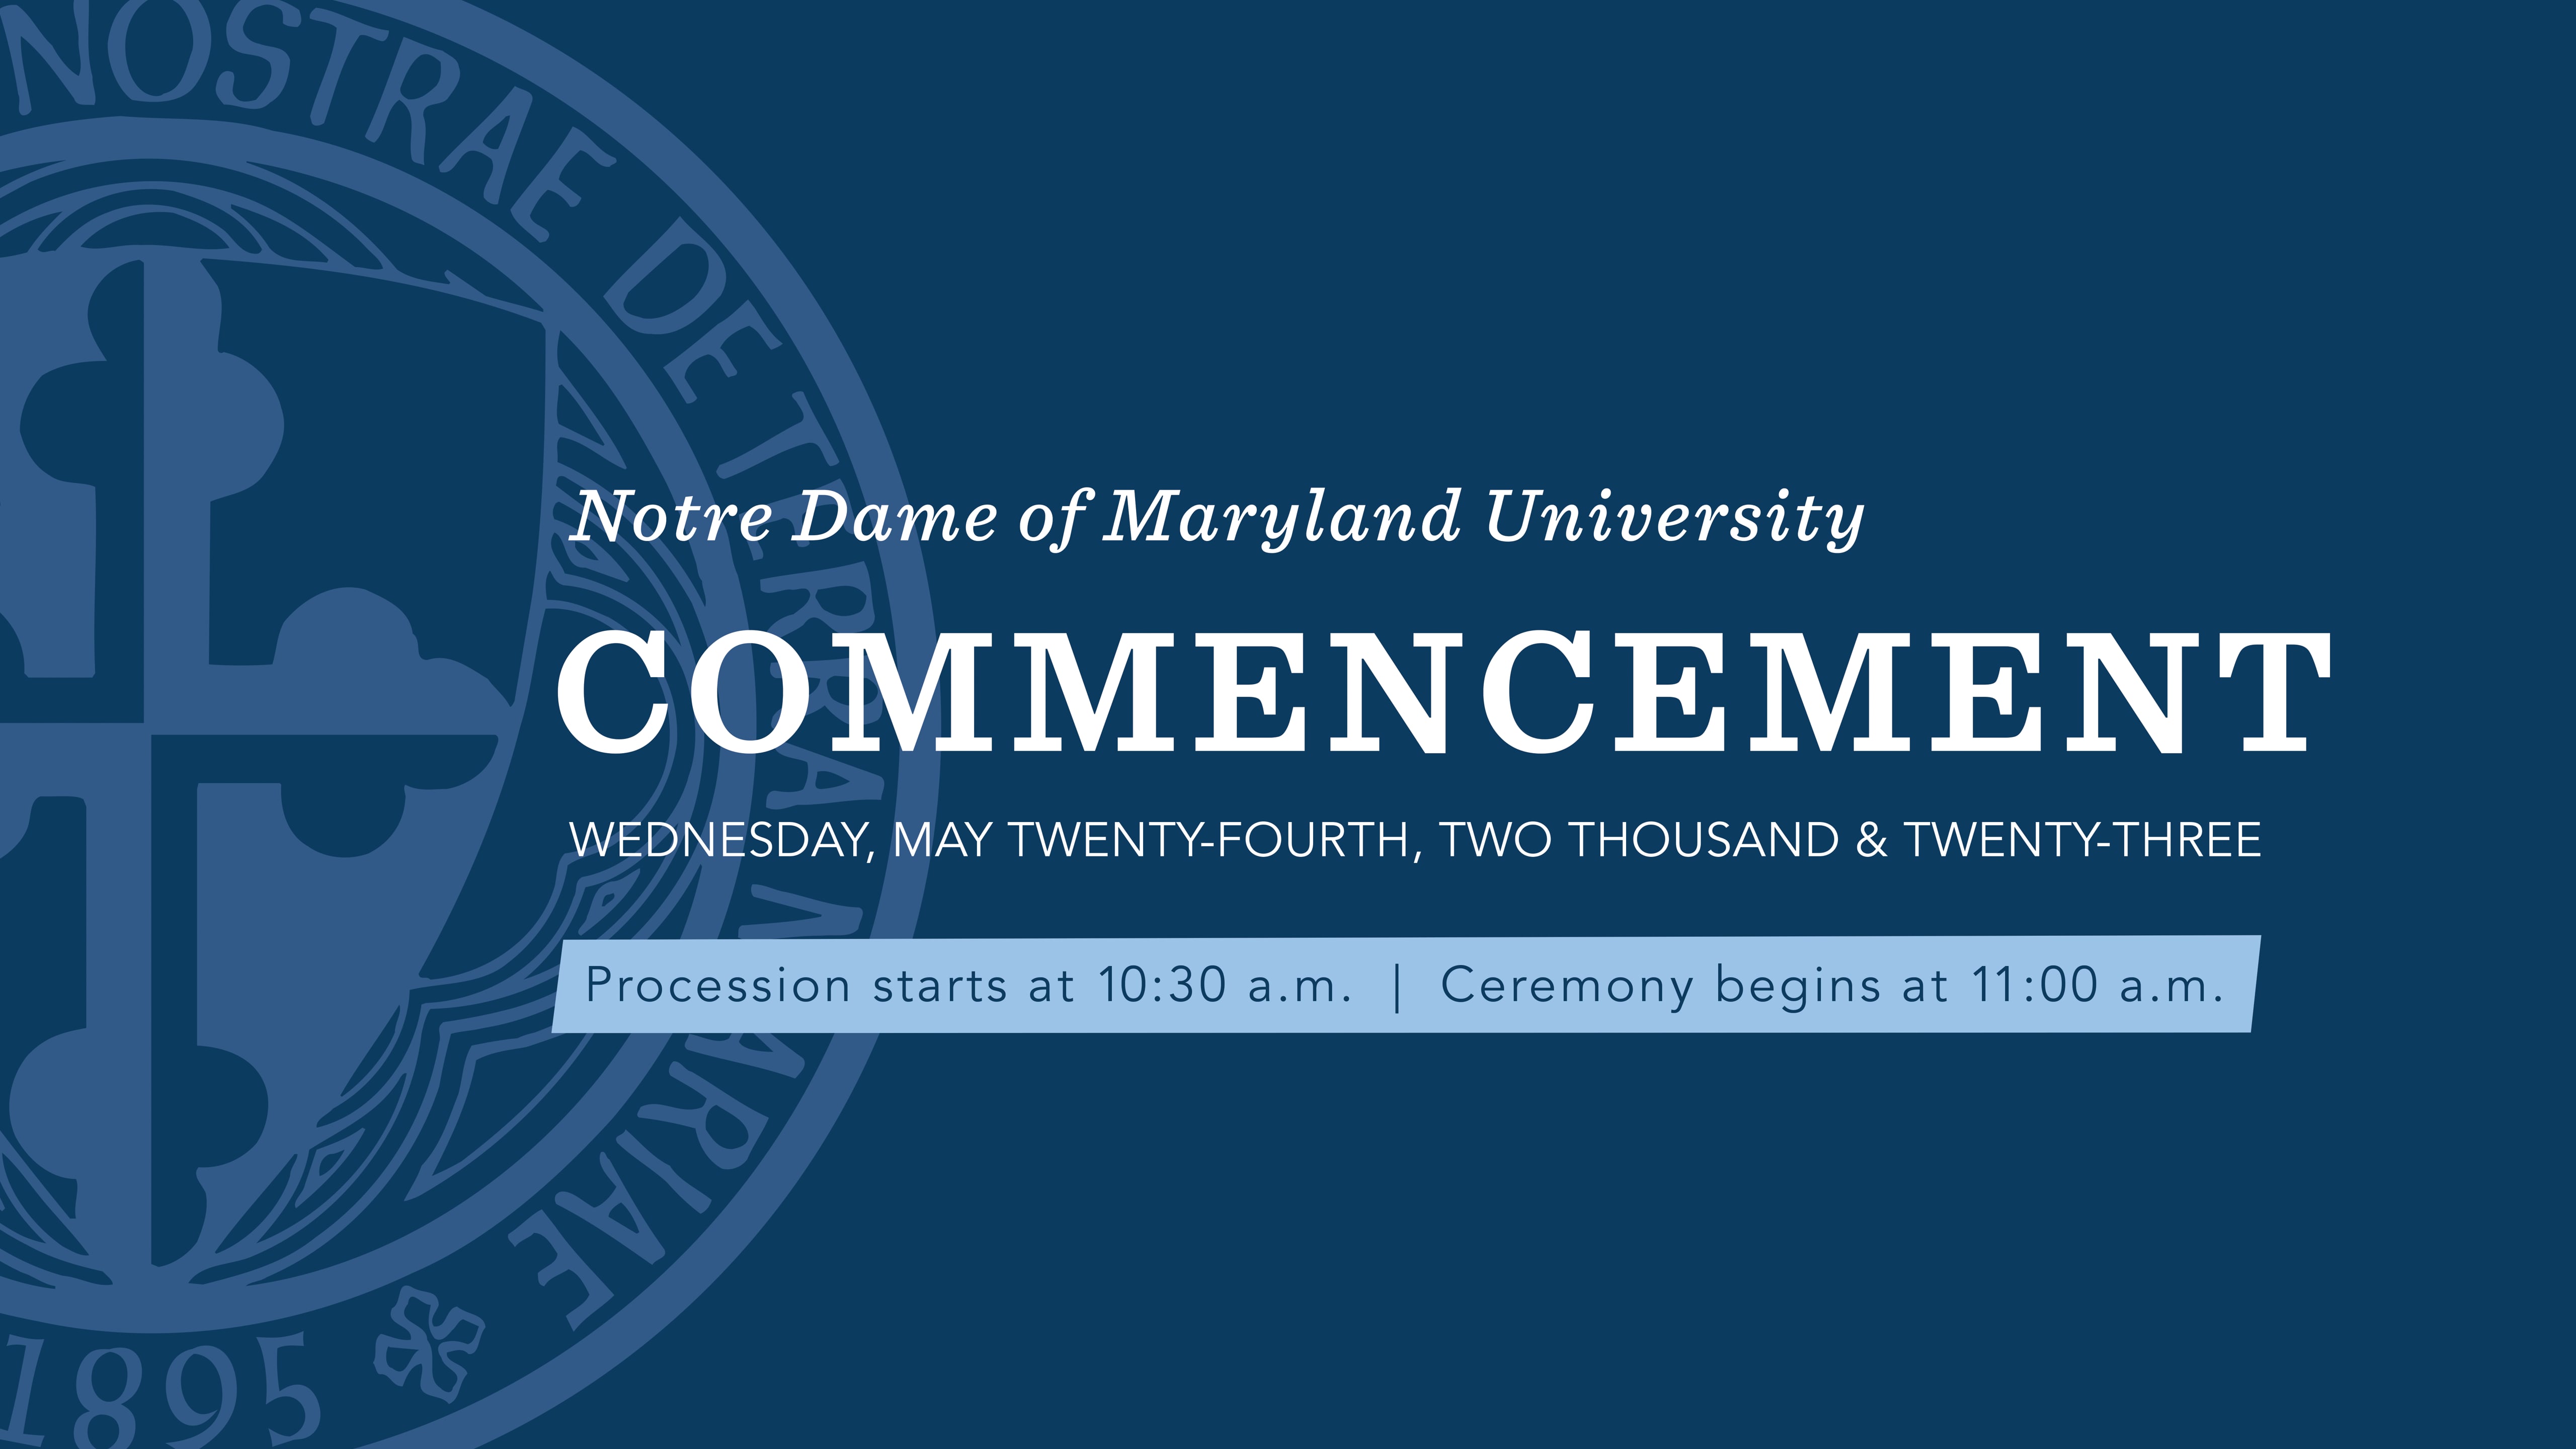 Notre Dame of Maryland University Commencement